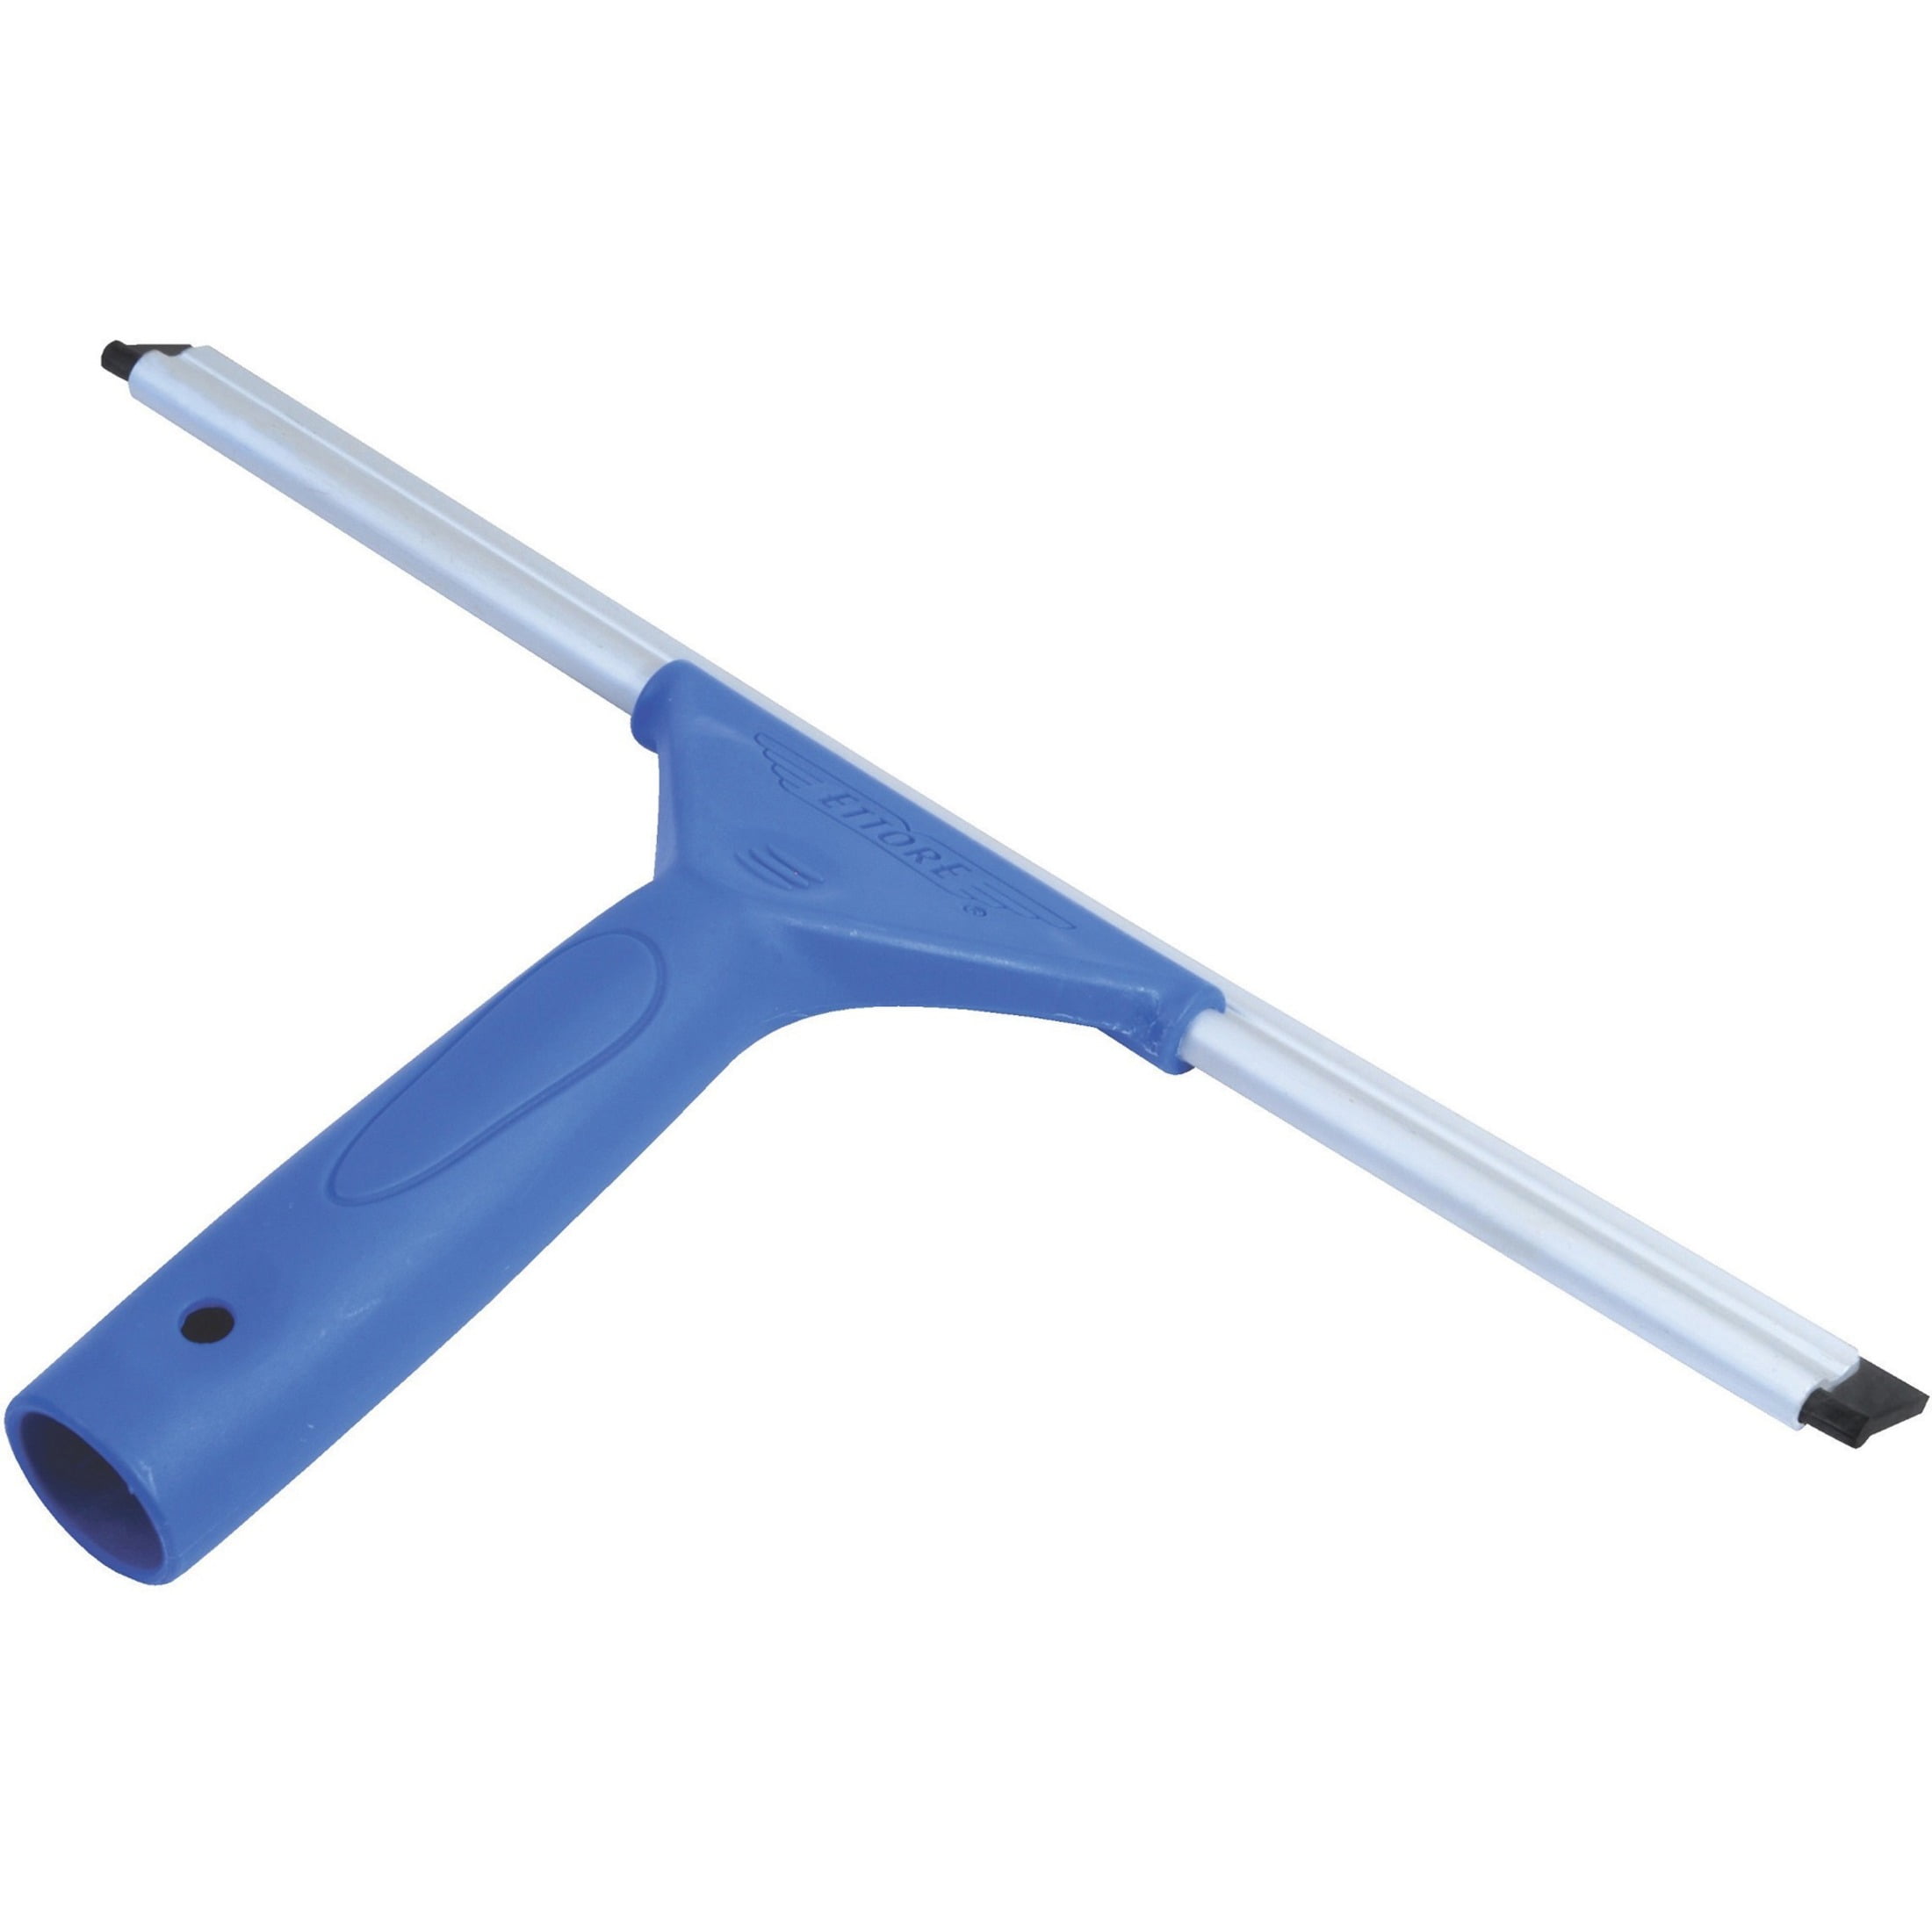 Unger 961010 Window Squeegee With Rubber Grip 12" 